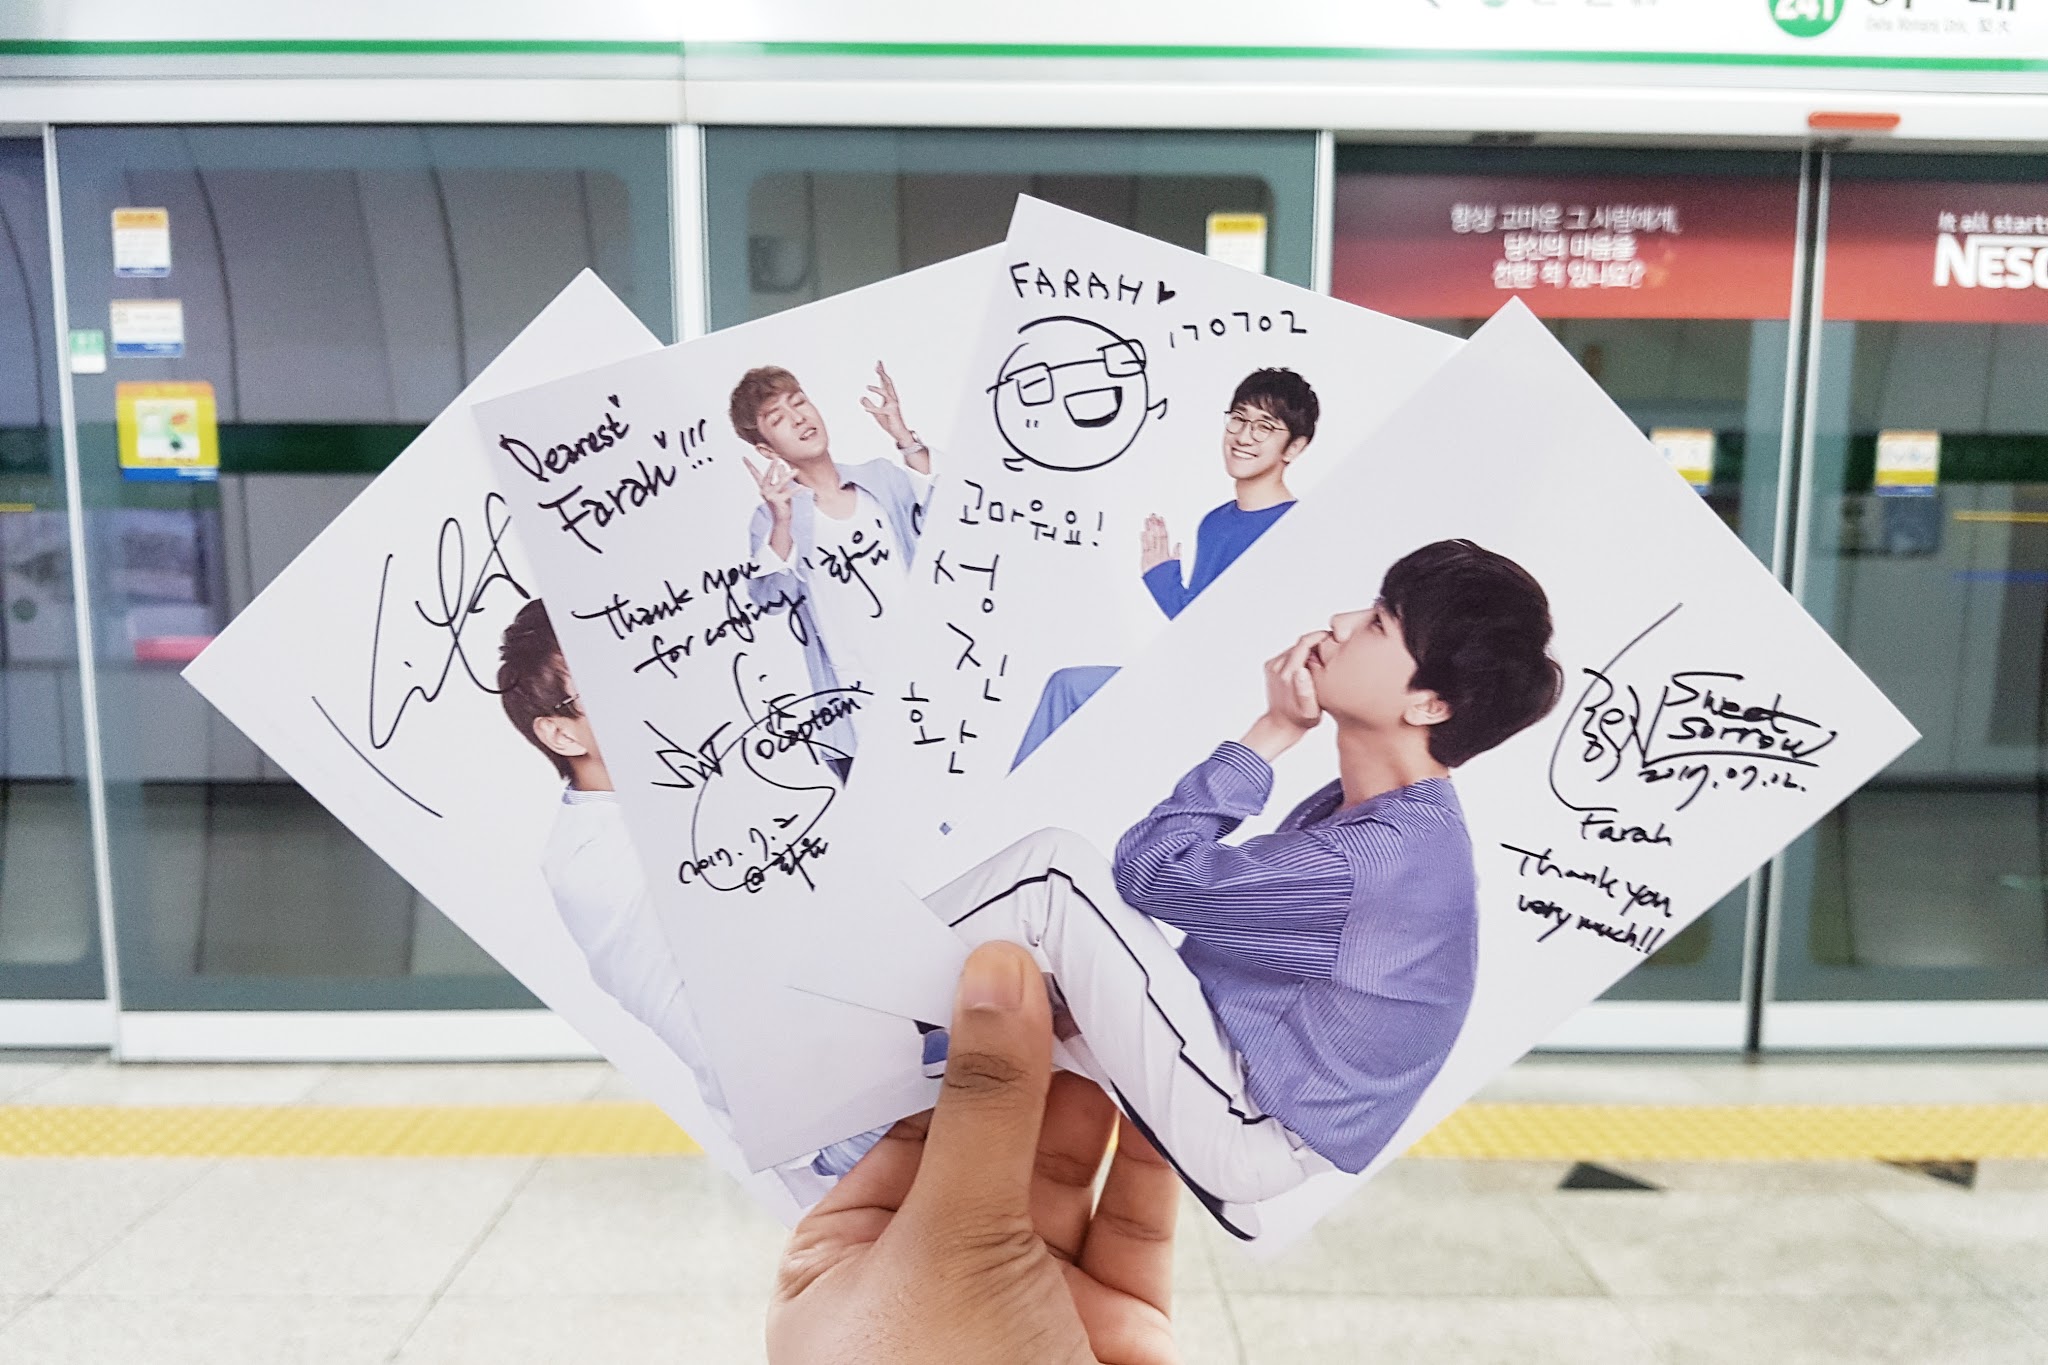 Personalized Autographed Postcards from Sweet Sorrow